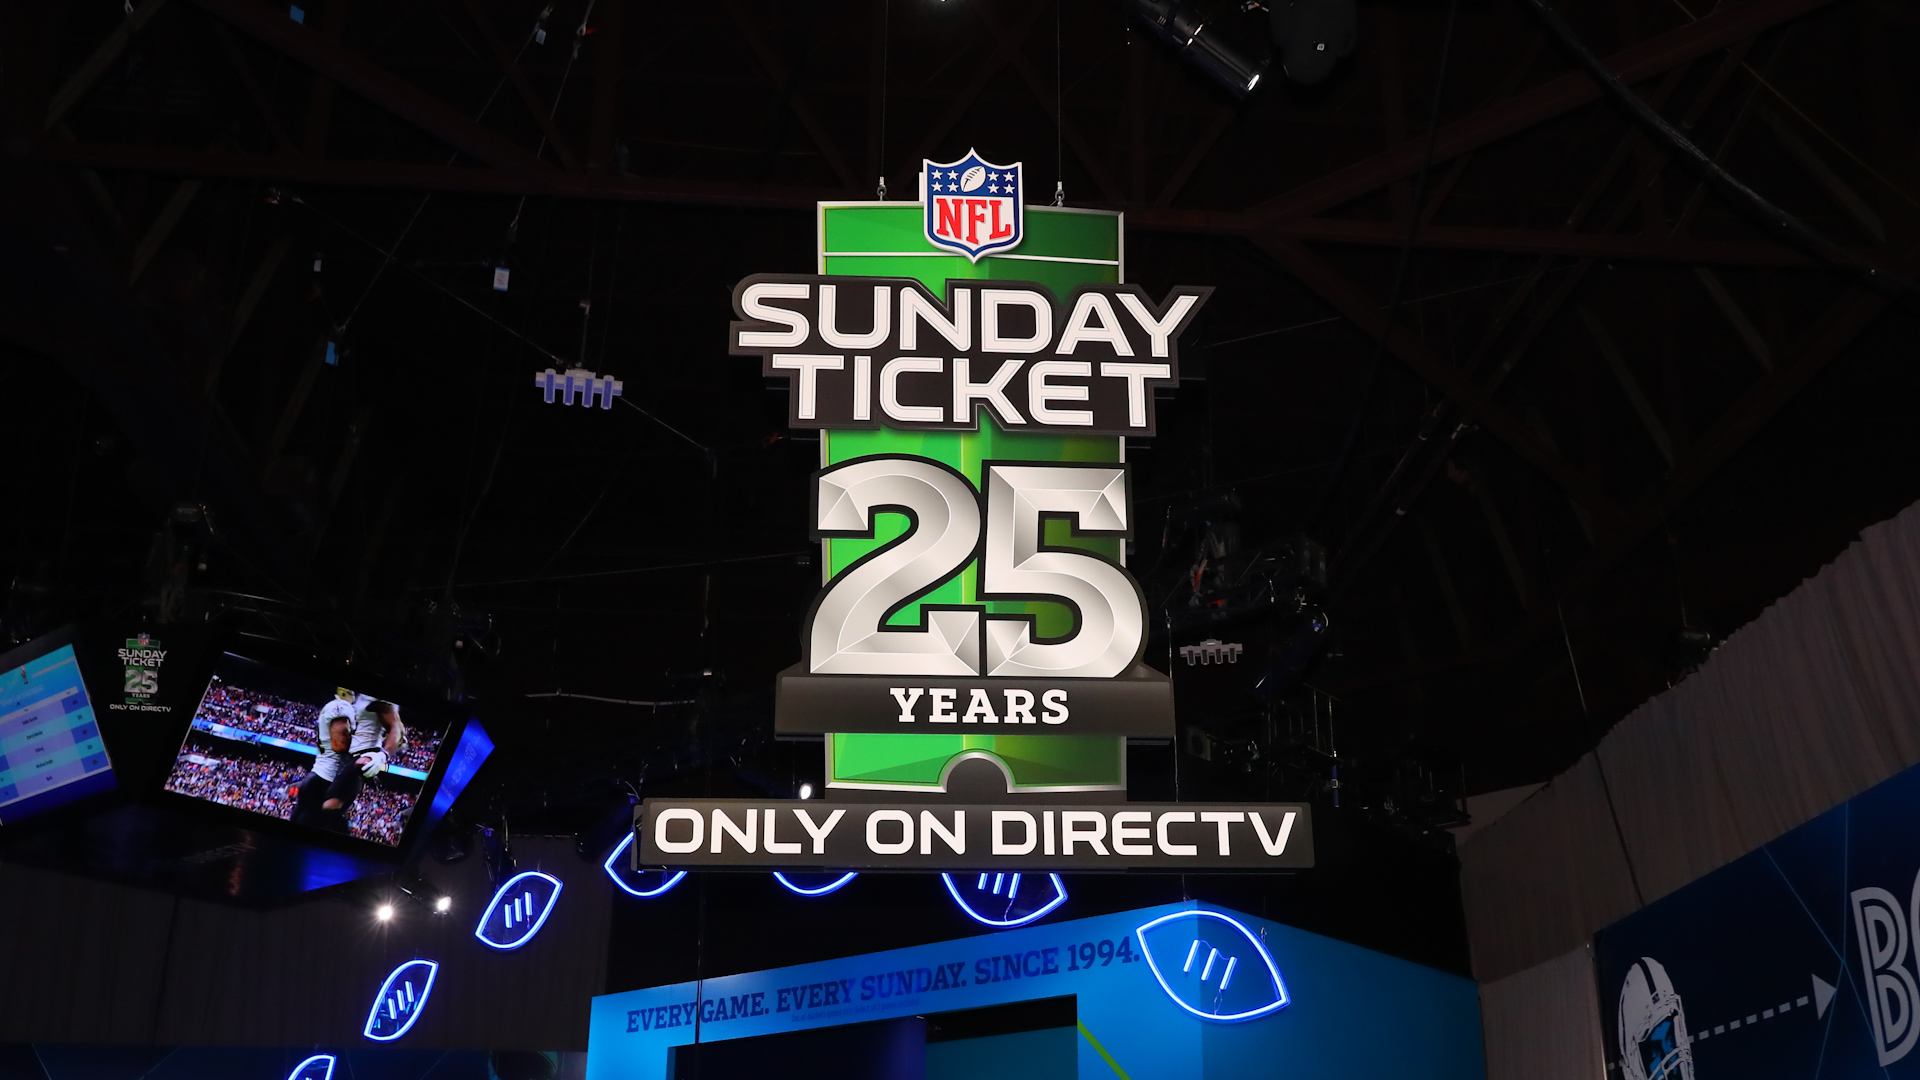 NFL ordered to pay nearly  billion for antitrust violations related to inflating "Sunday Ticket" prices in conspiracy with DirecTV.